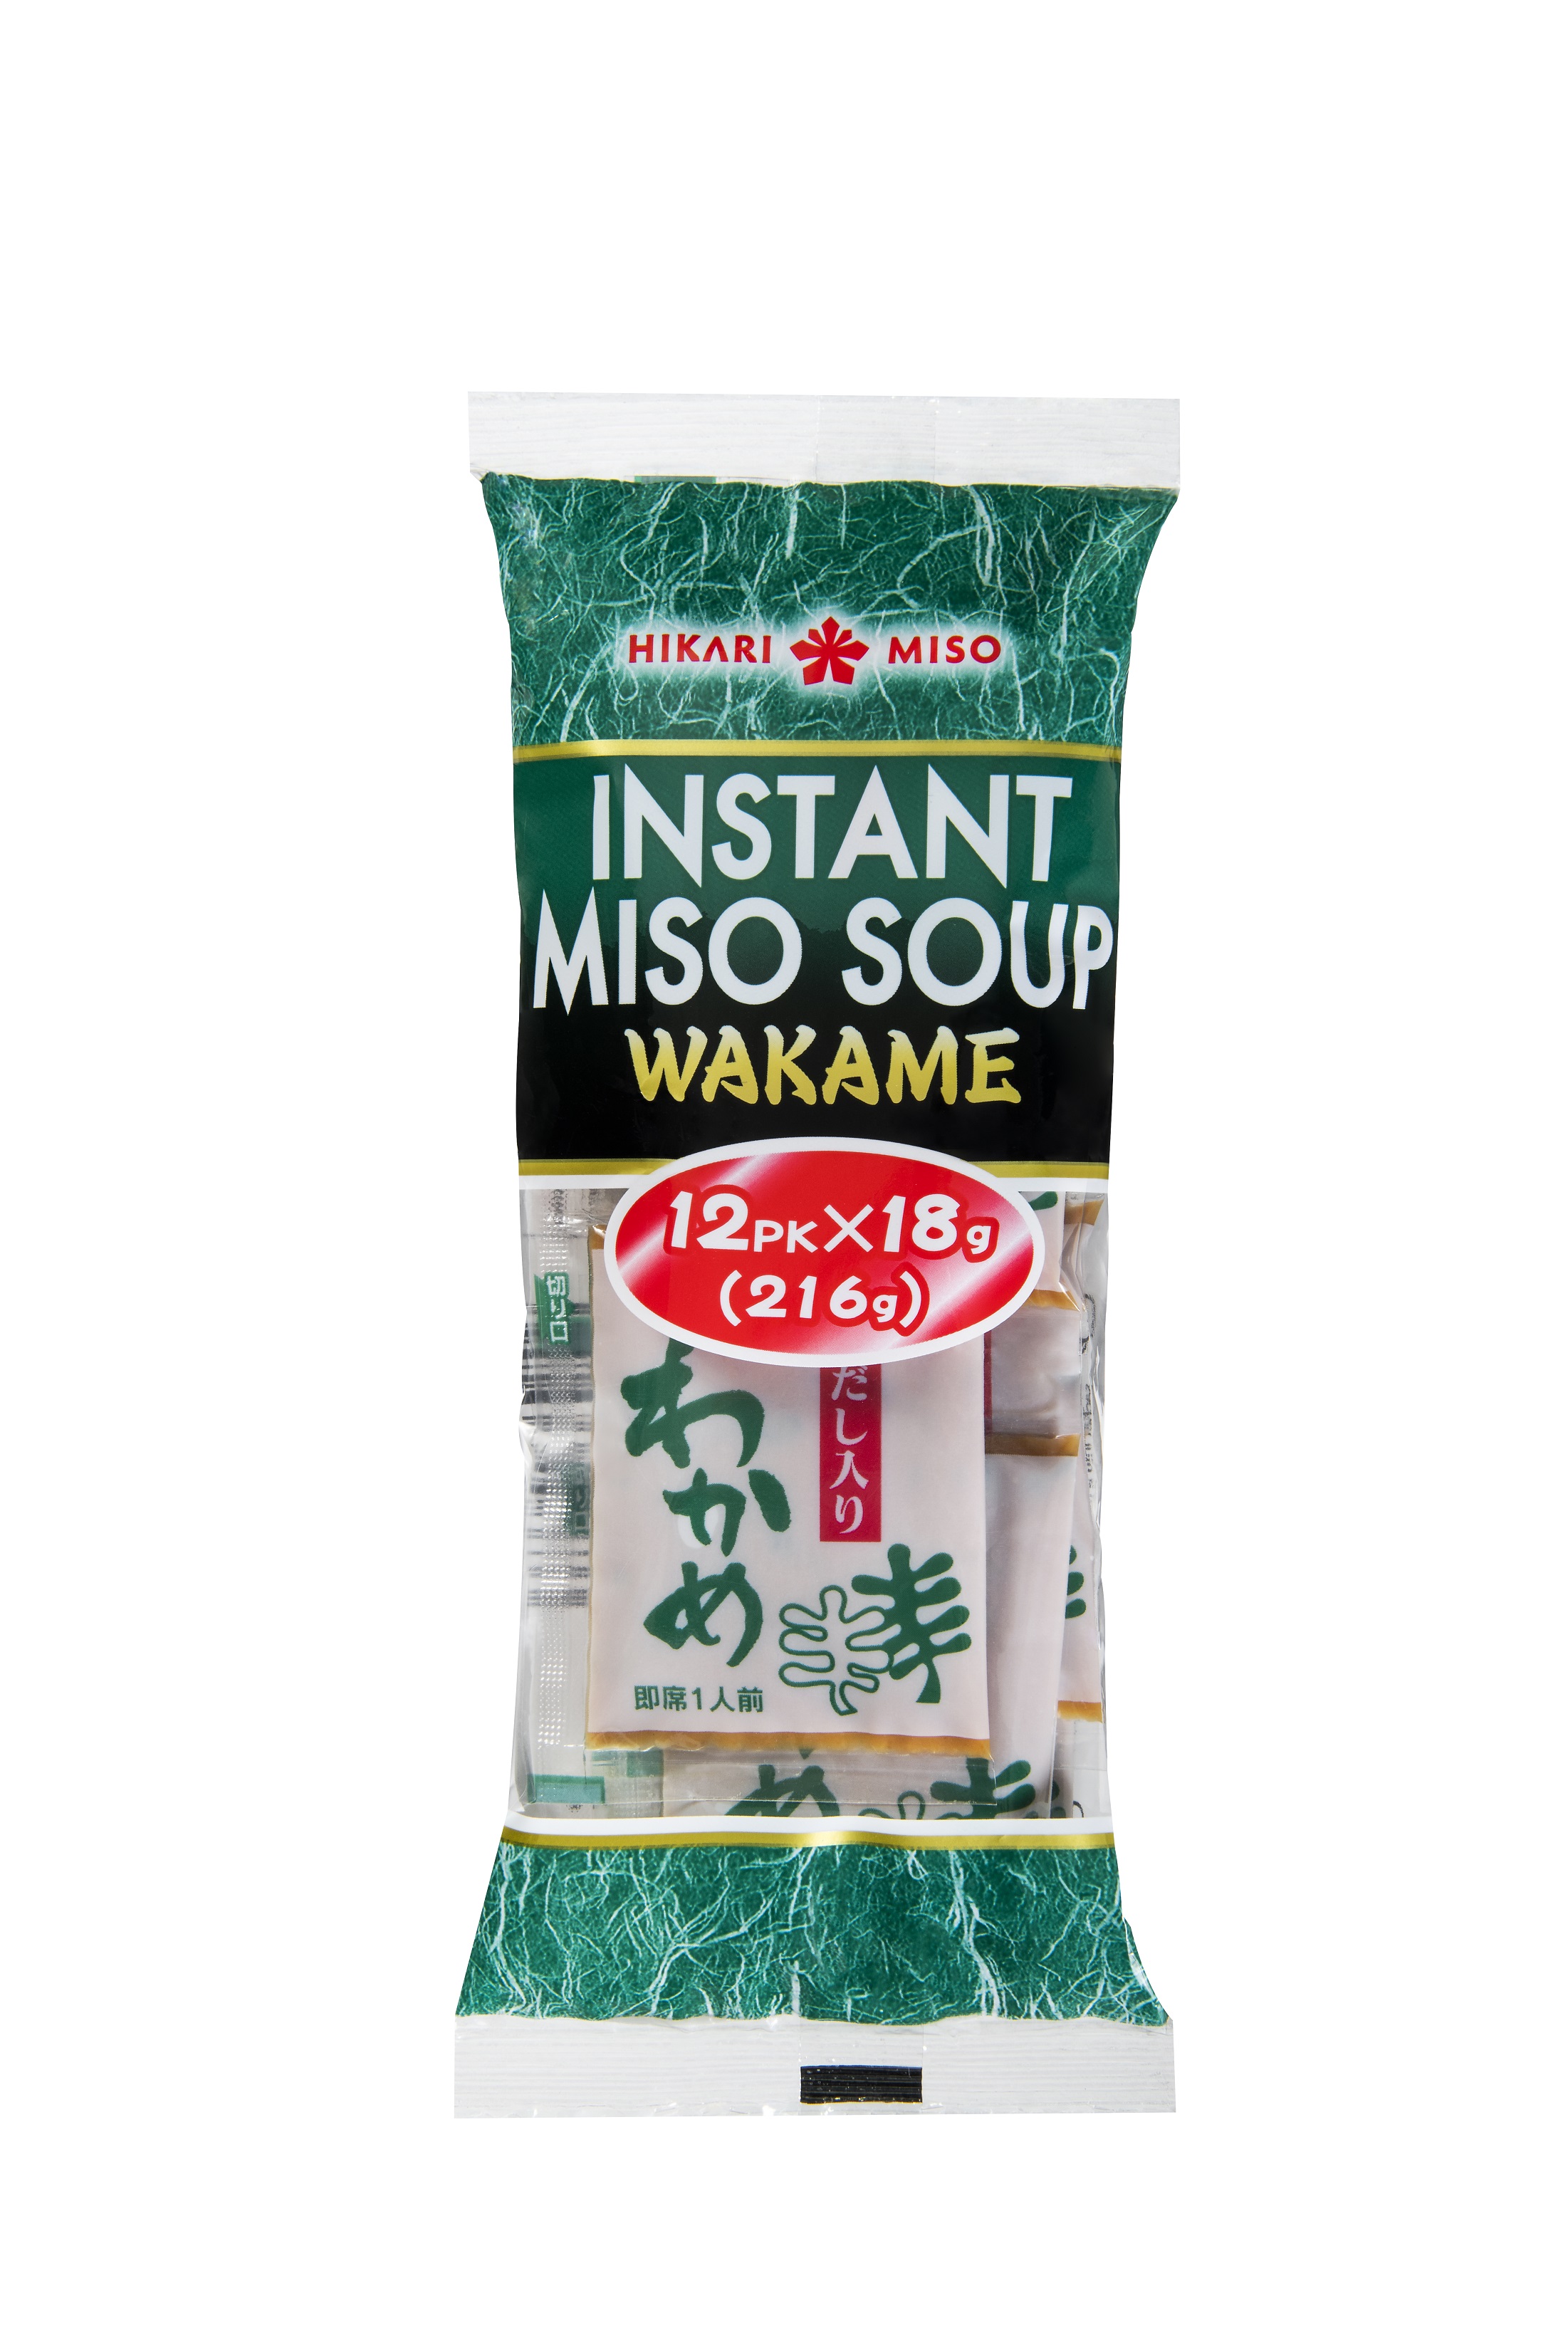 Wakame Miso Soup 12 servings7.6 oz (216 g)